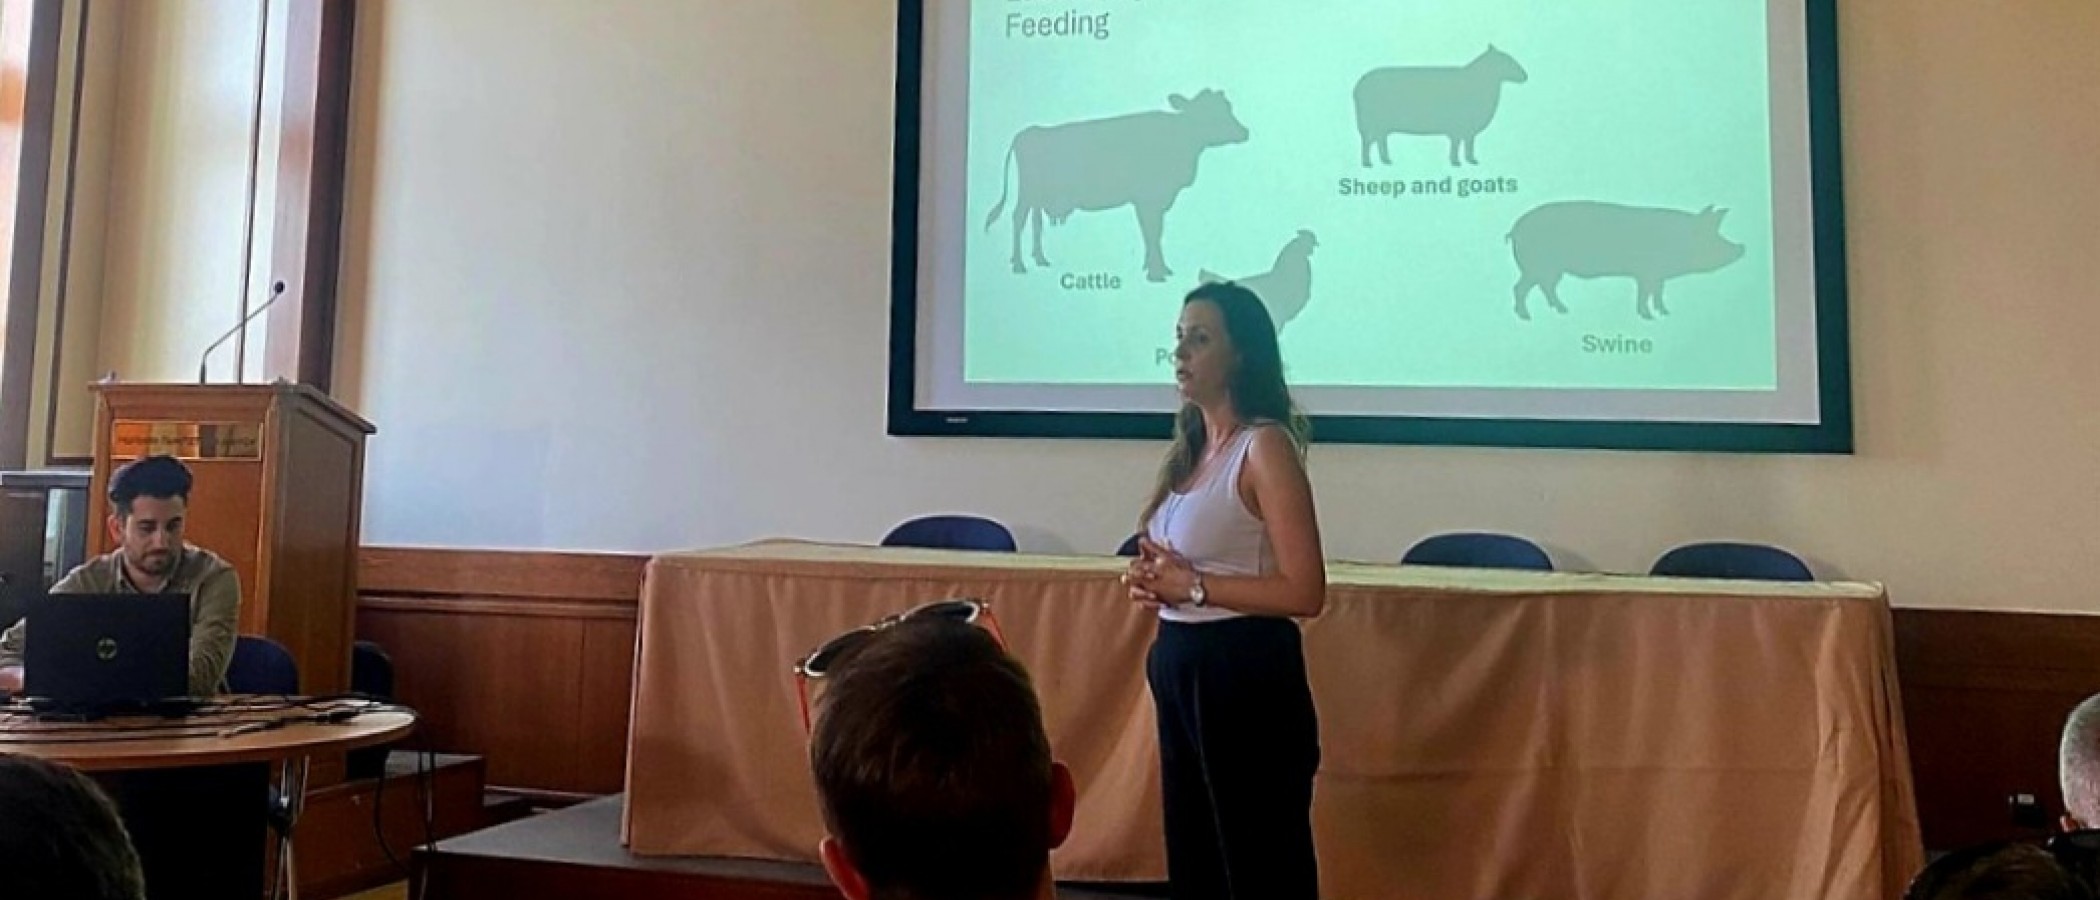 Meeting of Experts in wielding thematic fields of Animal Science at the Agricultural University of Athens.